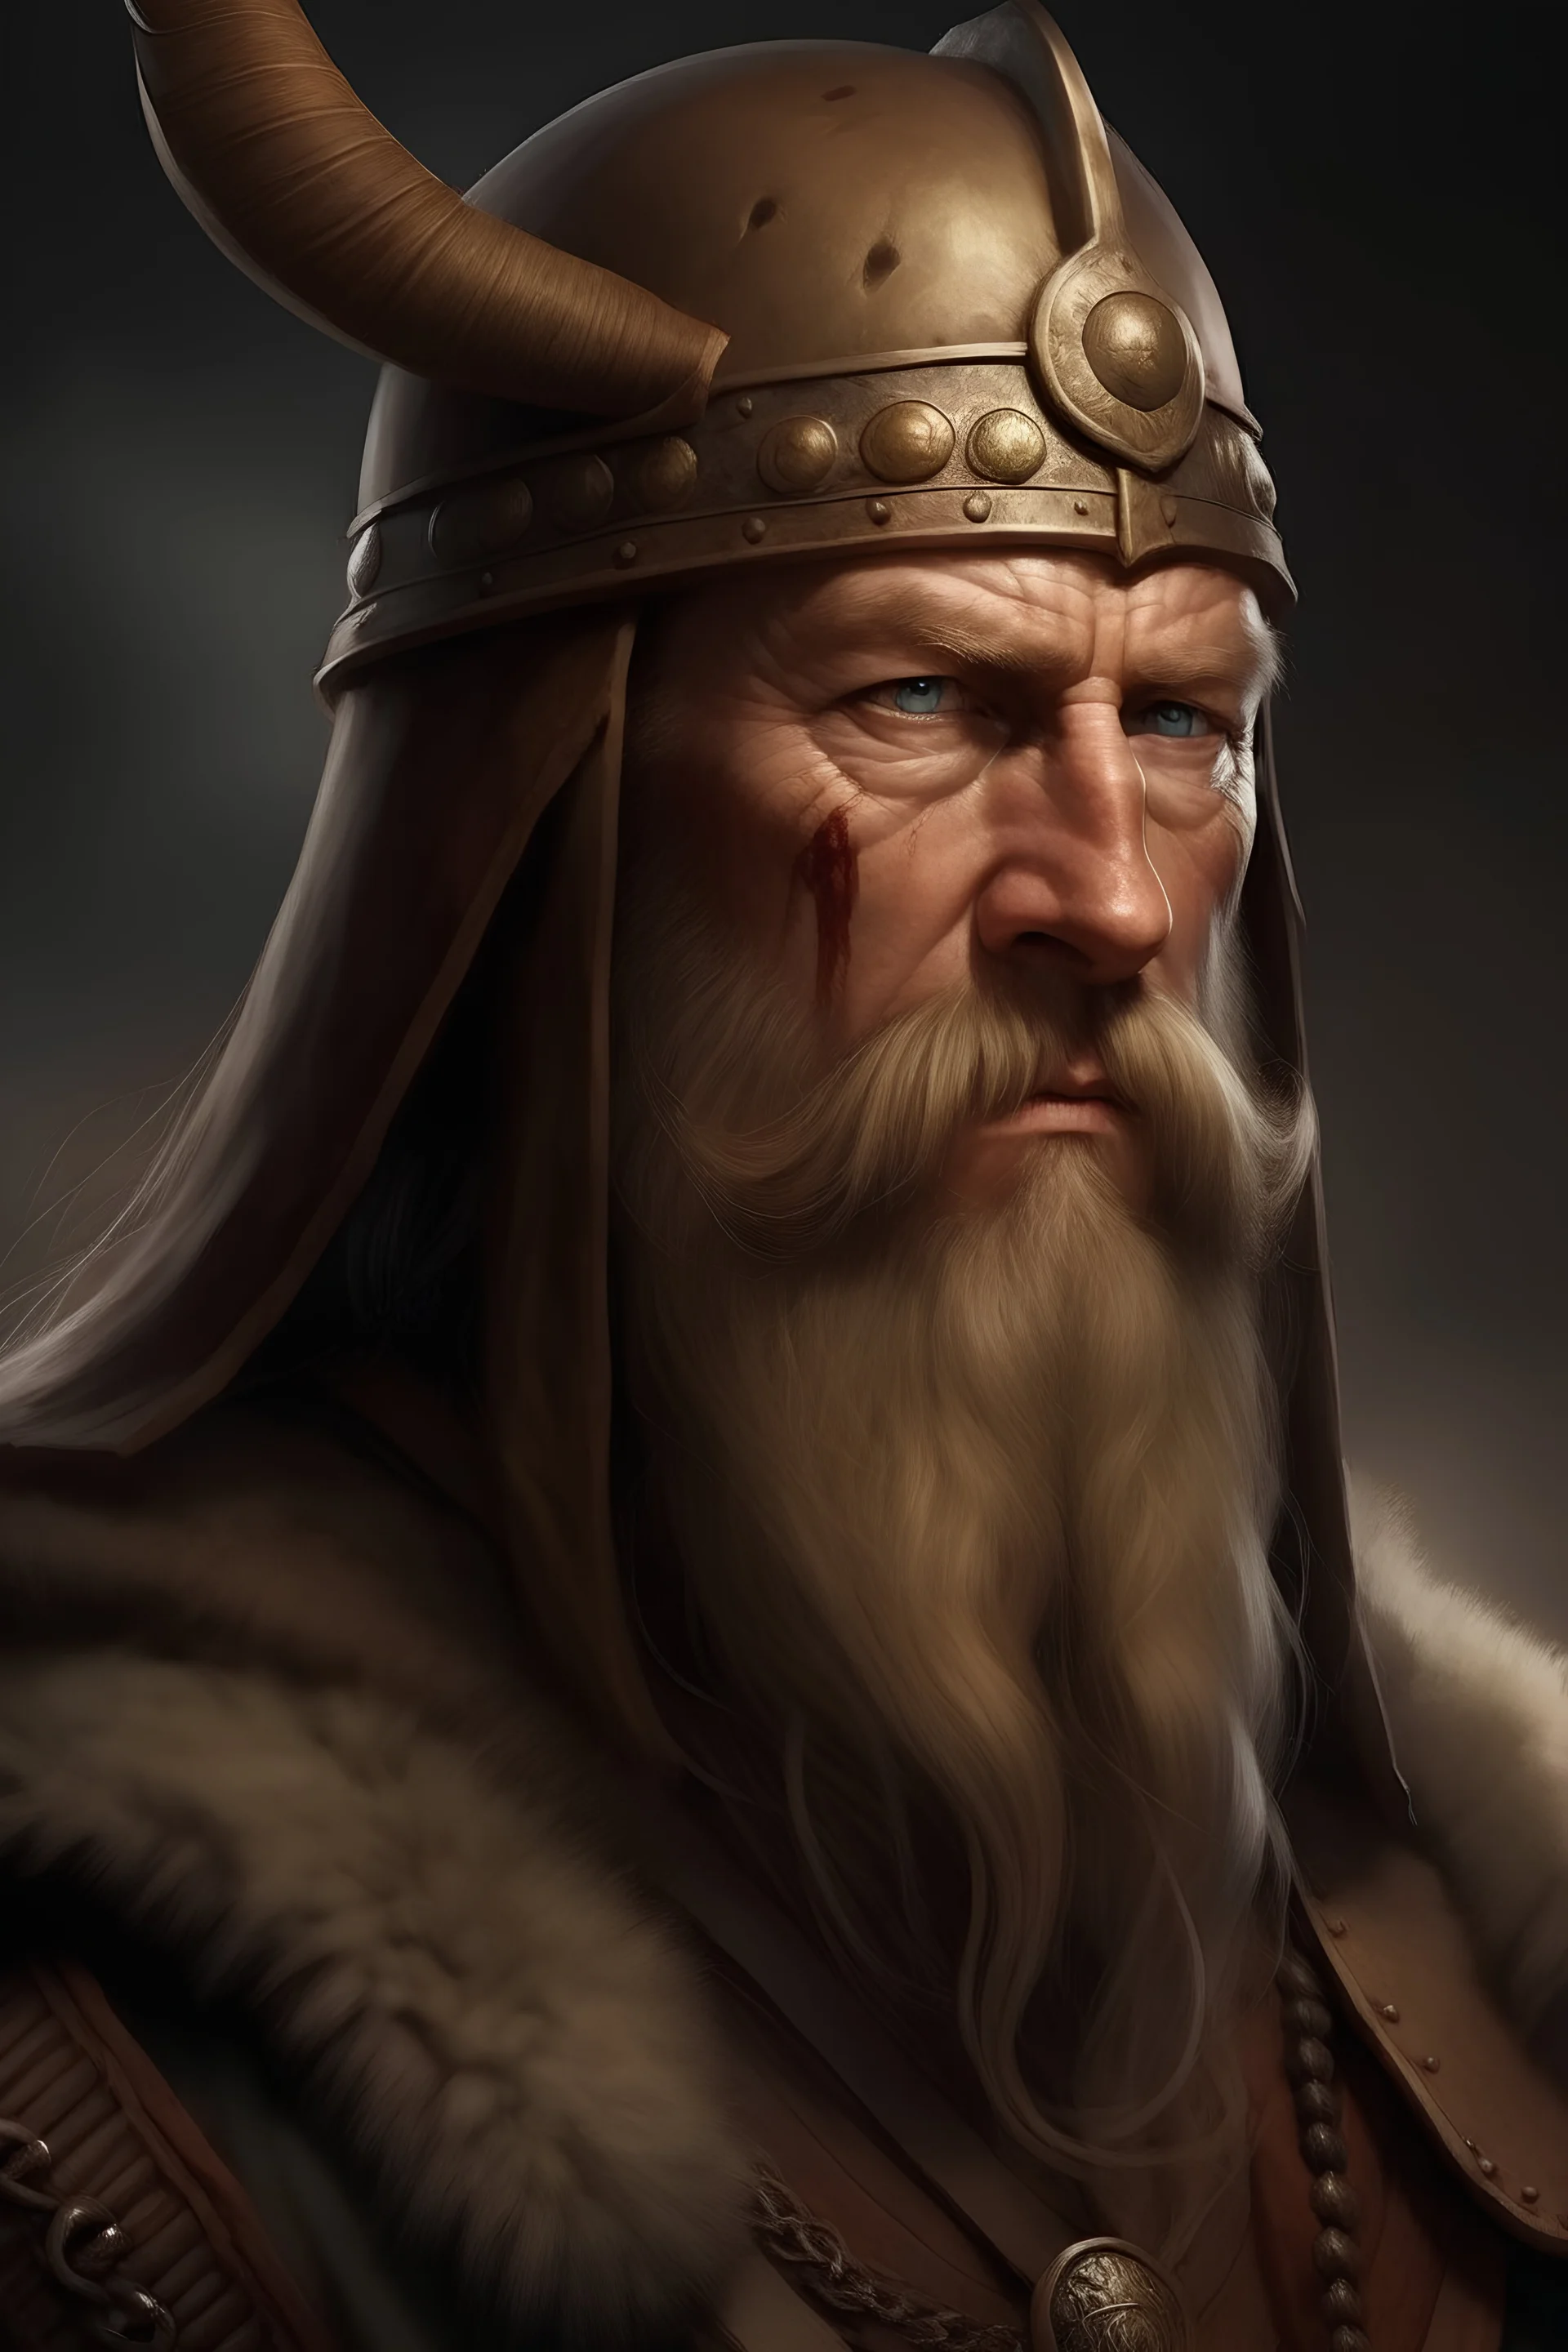 Harald is a viking